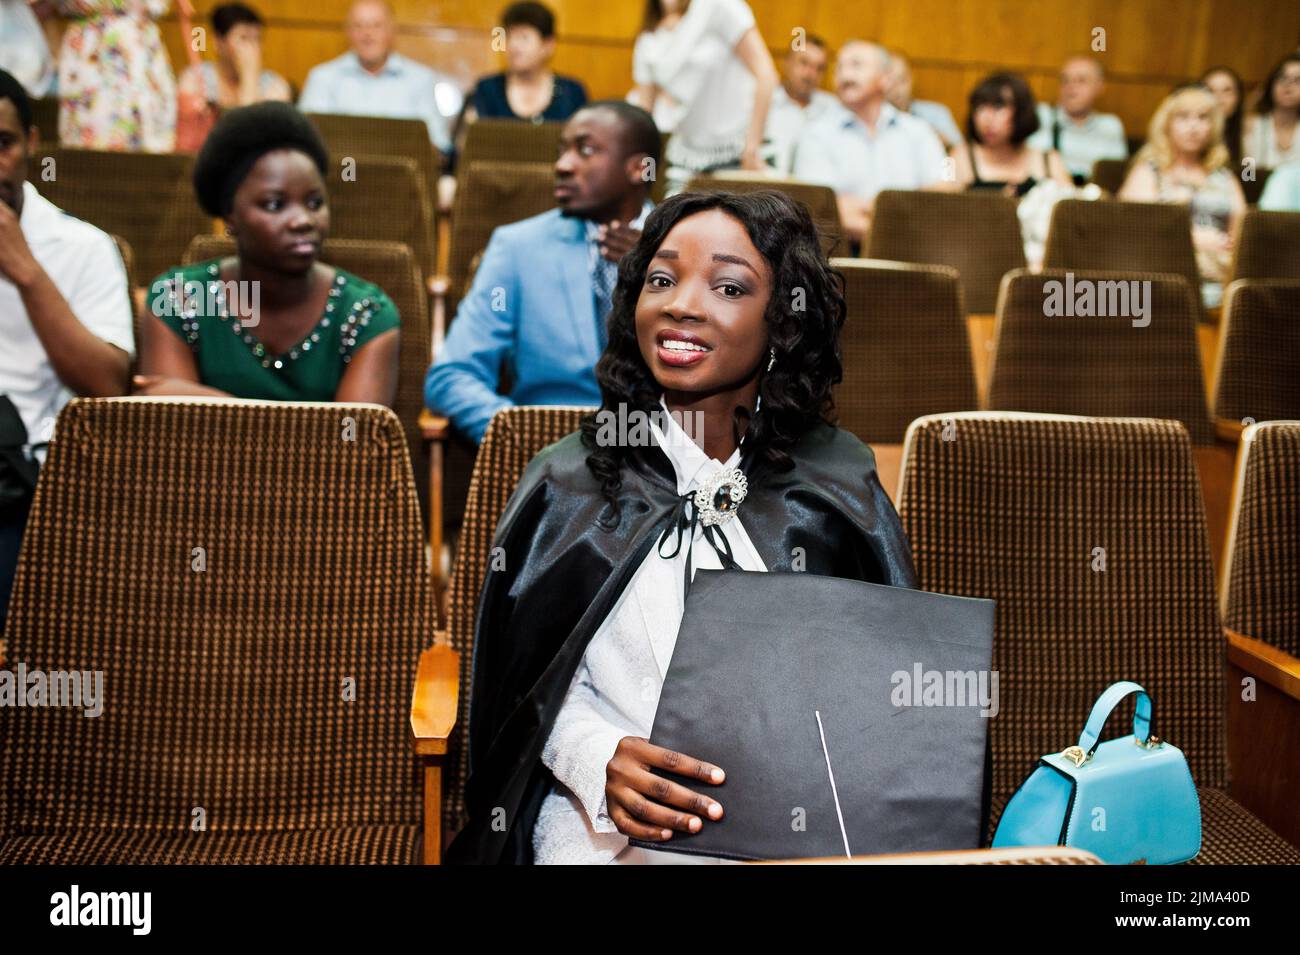 Happy black african american girl with hat and gown finissants au diplôme cérémonie Banque D'Images